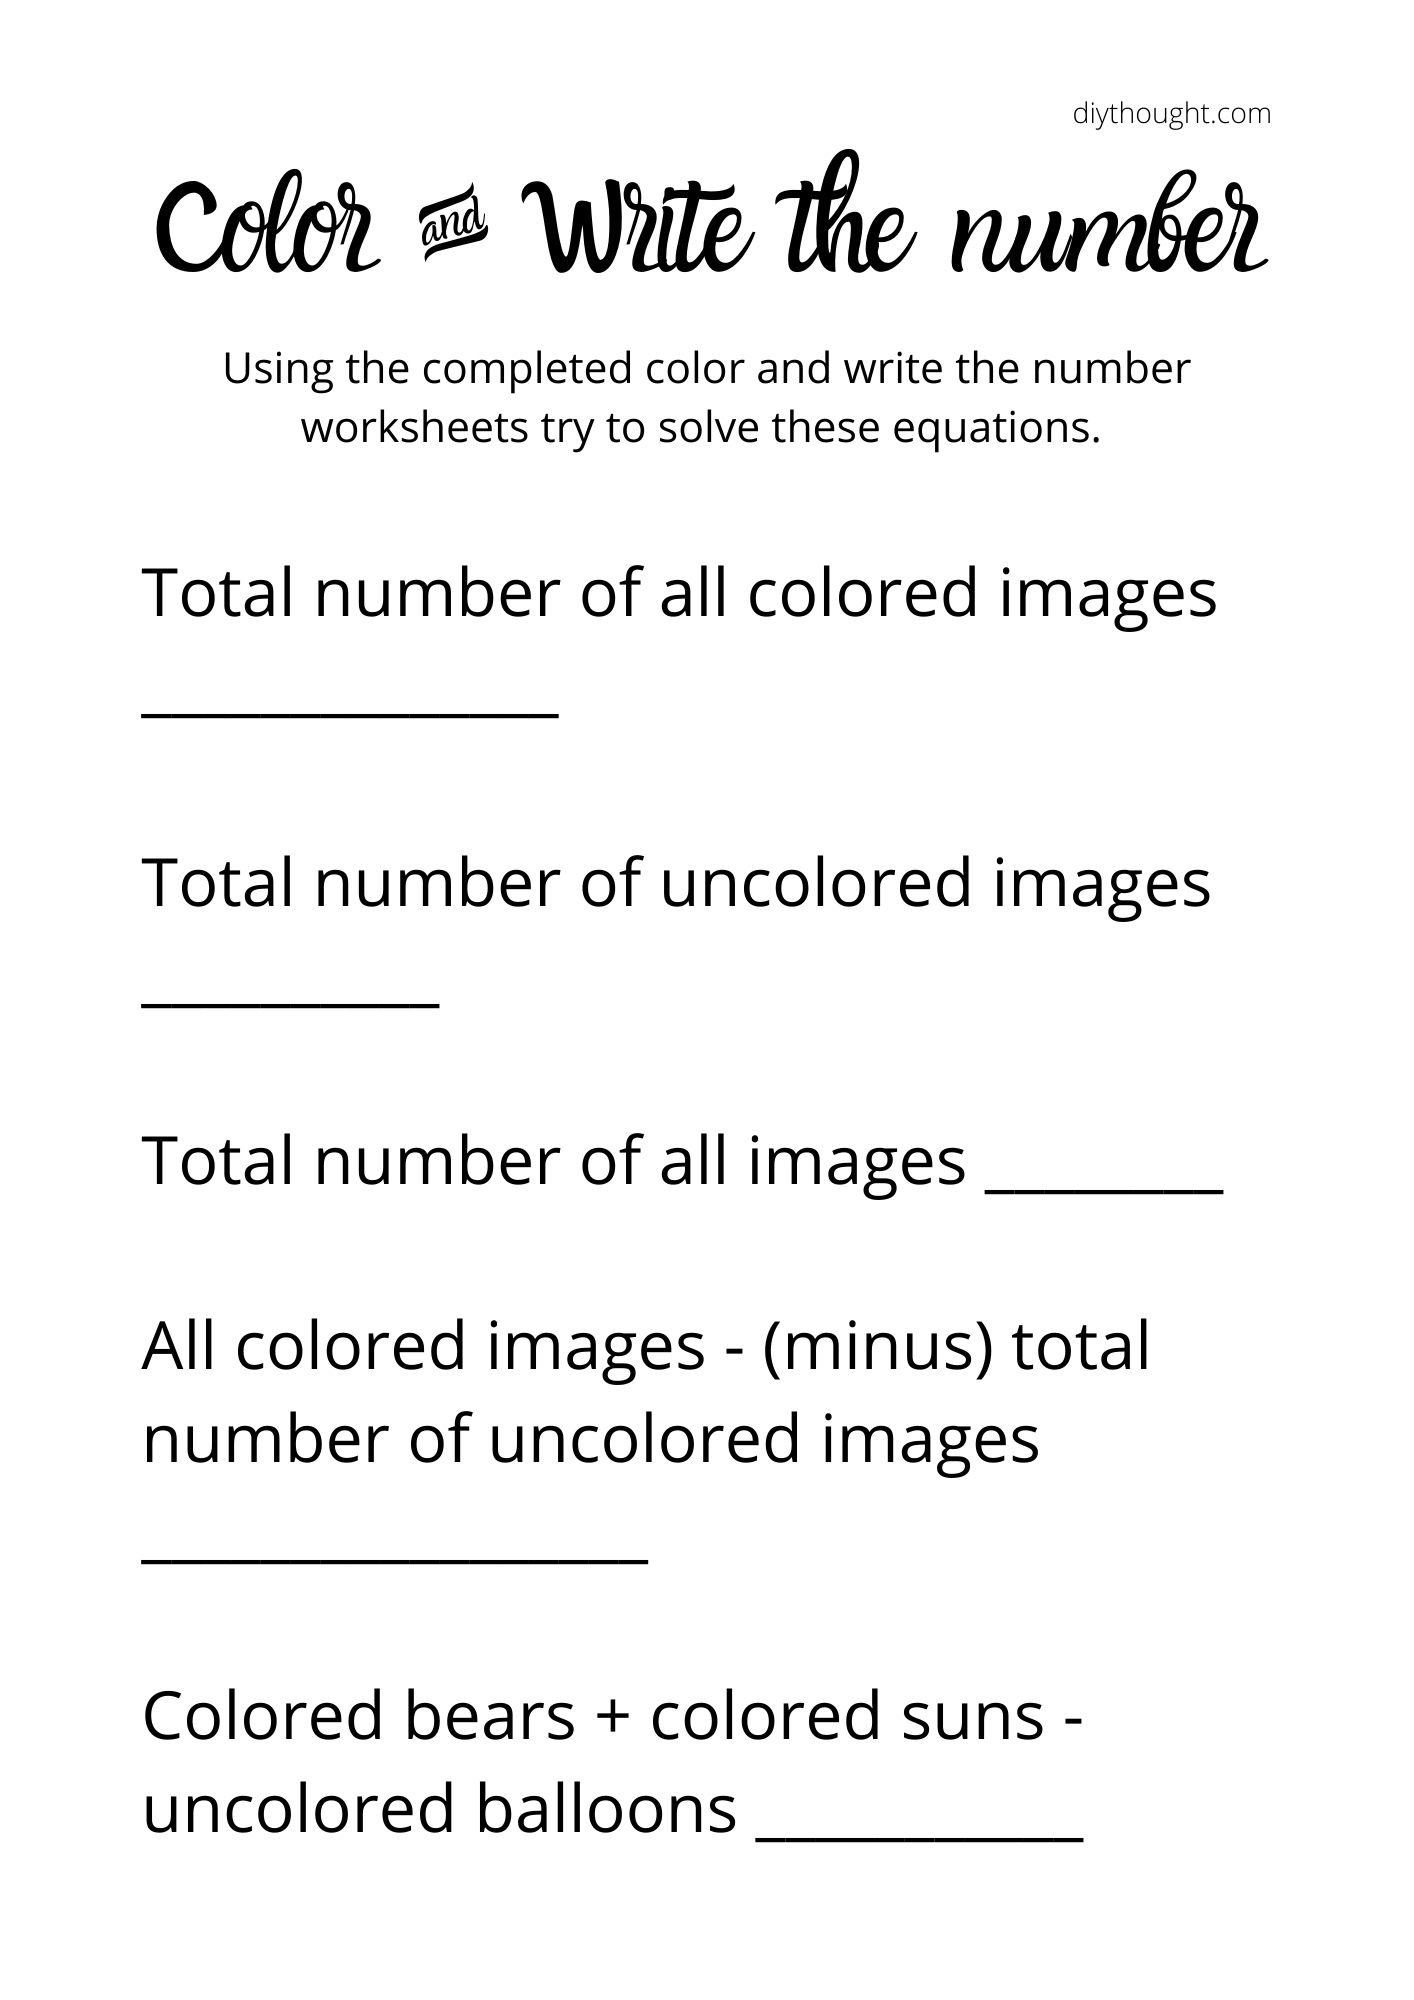 numbers-to-20-worksheets-diy-thought